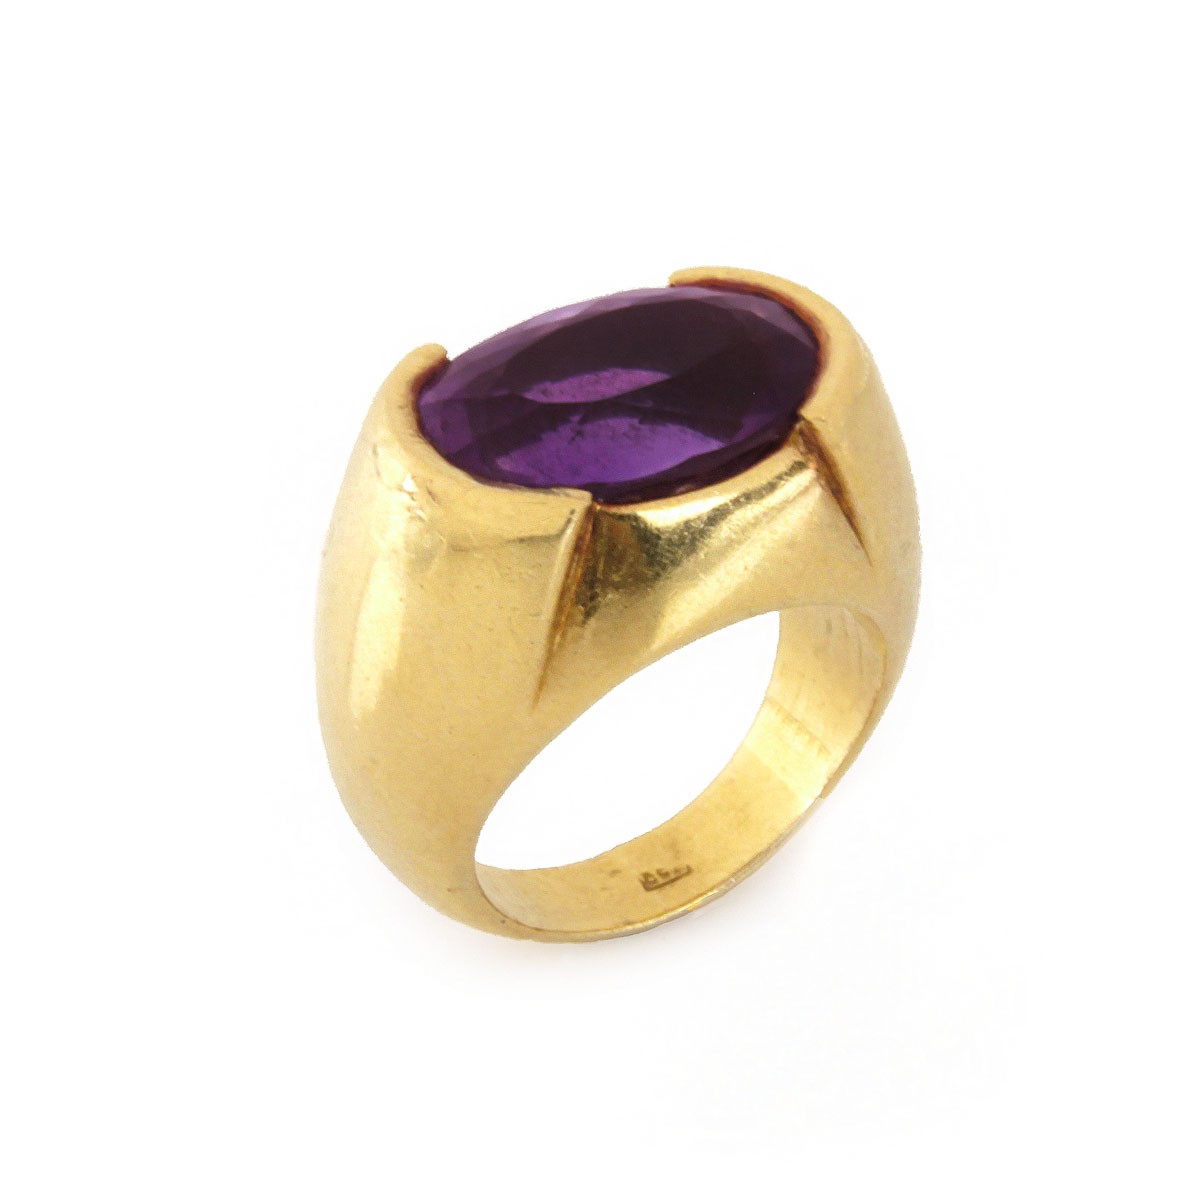 Vintage Amethyst and 18K Ring